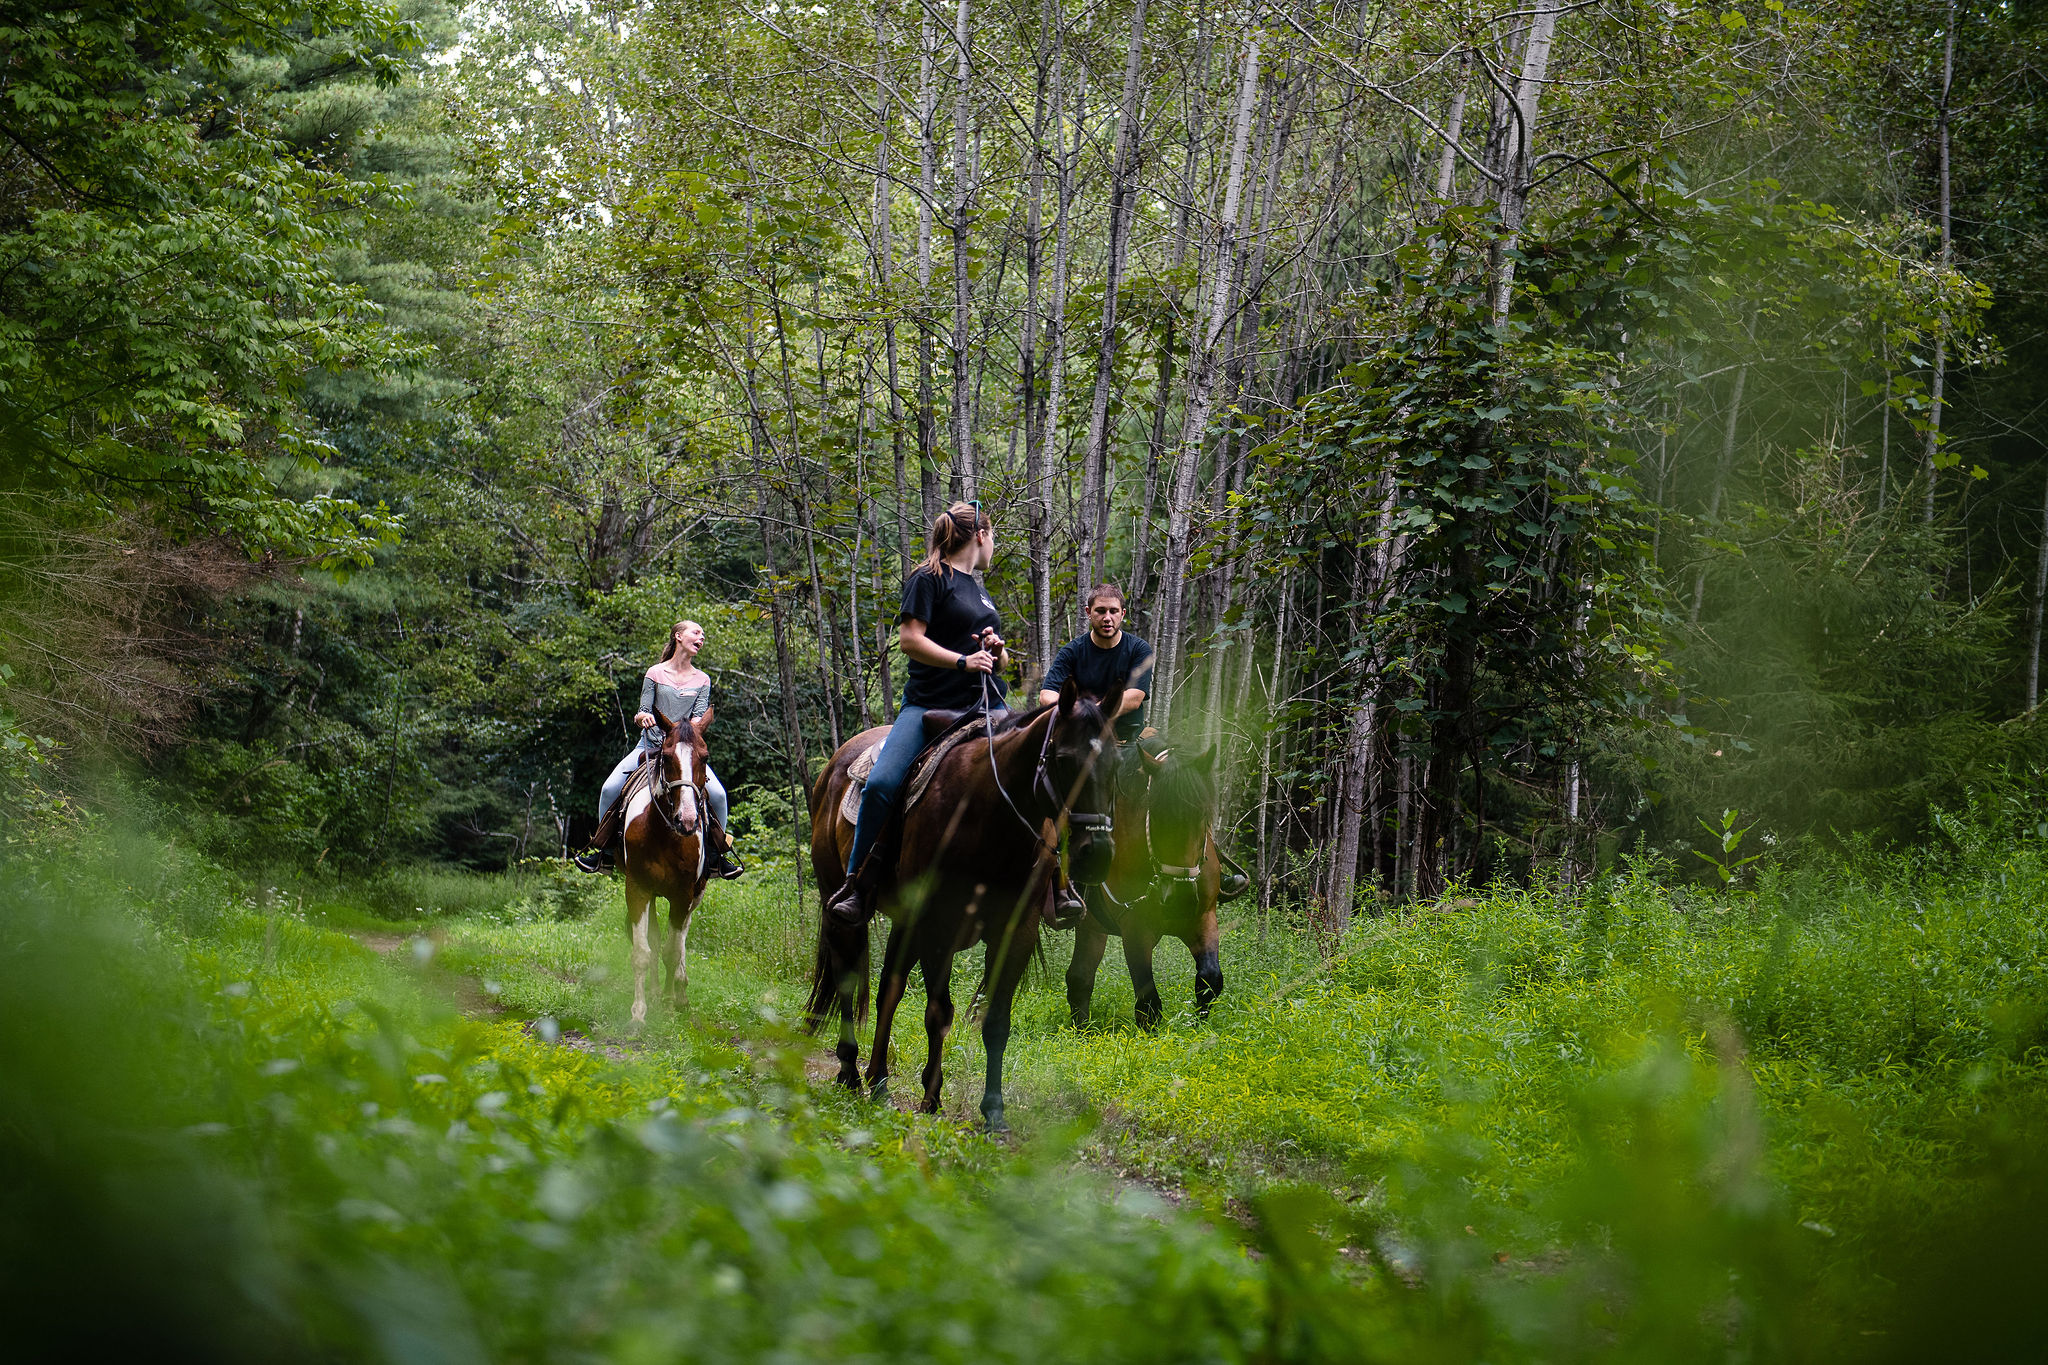 Two Women and One Man on Horseback Trail Ride in Woods